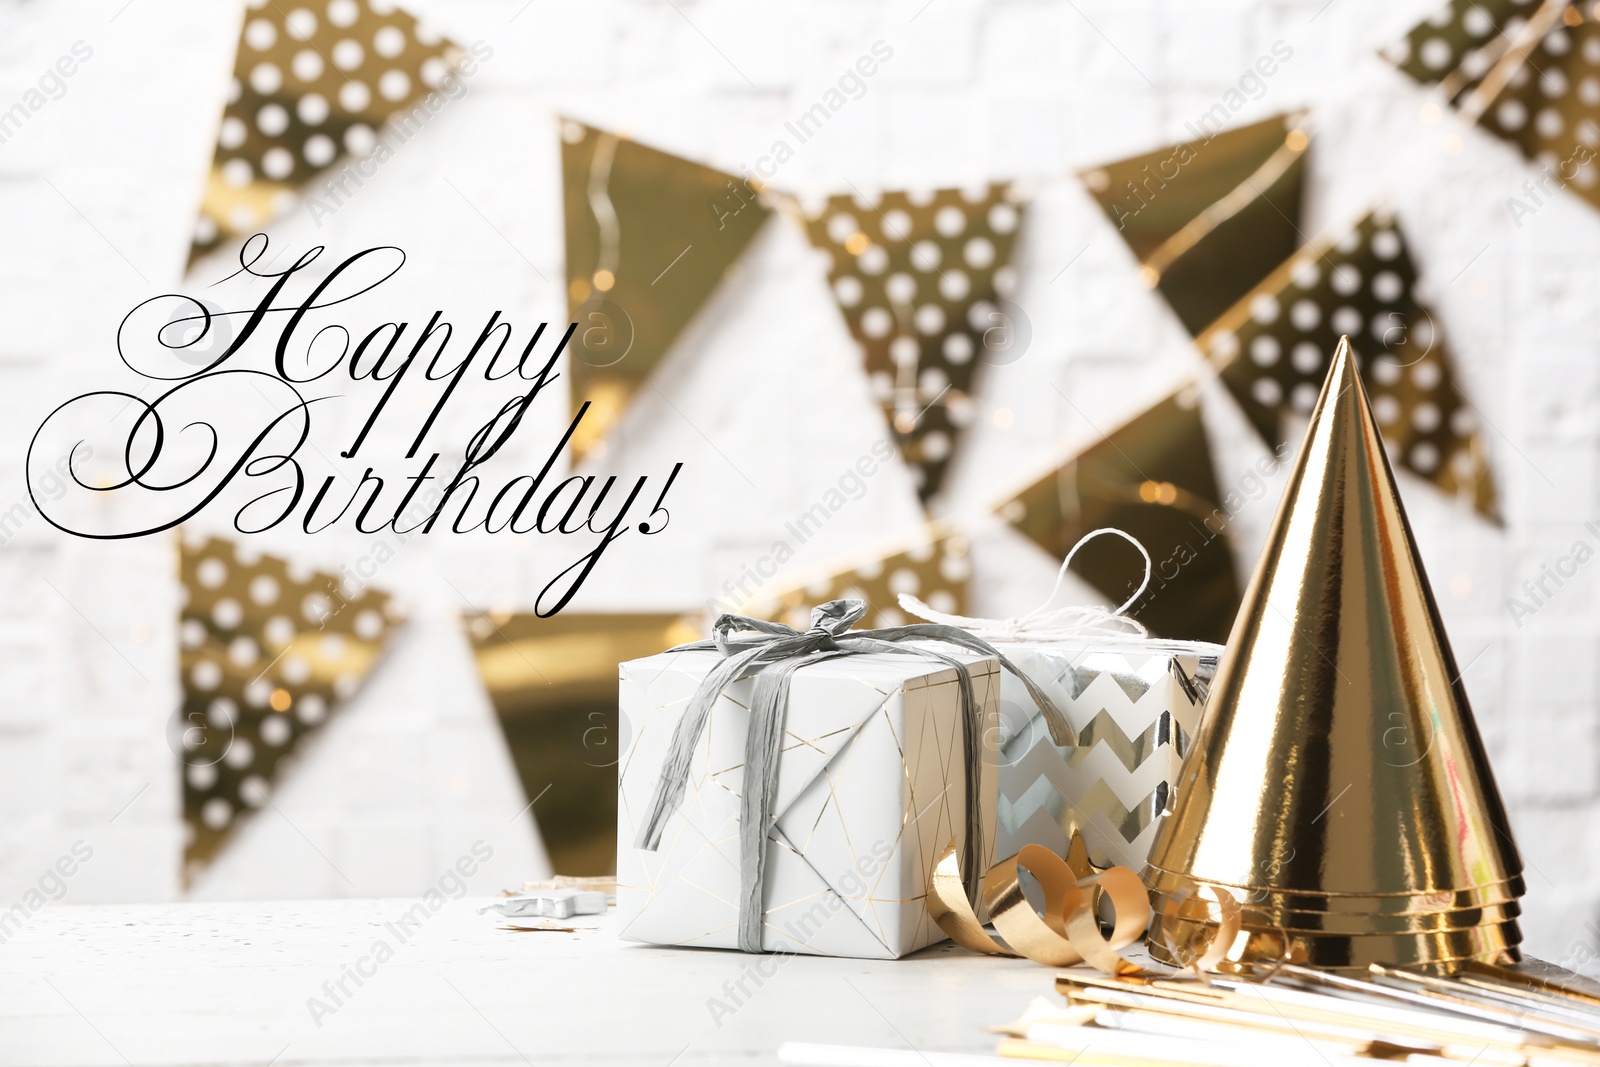 Photo of Gifts, party cones and greeting HAPPY BIRTHDAY on blurred background